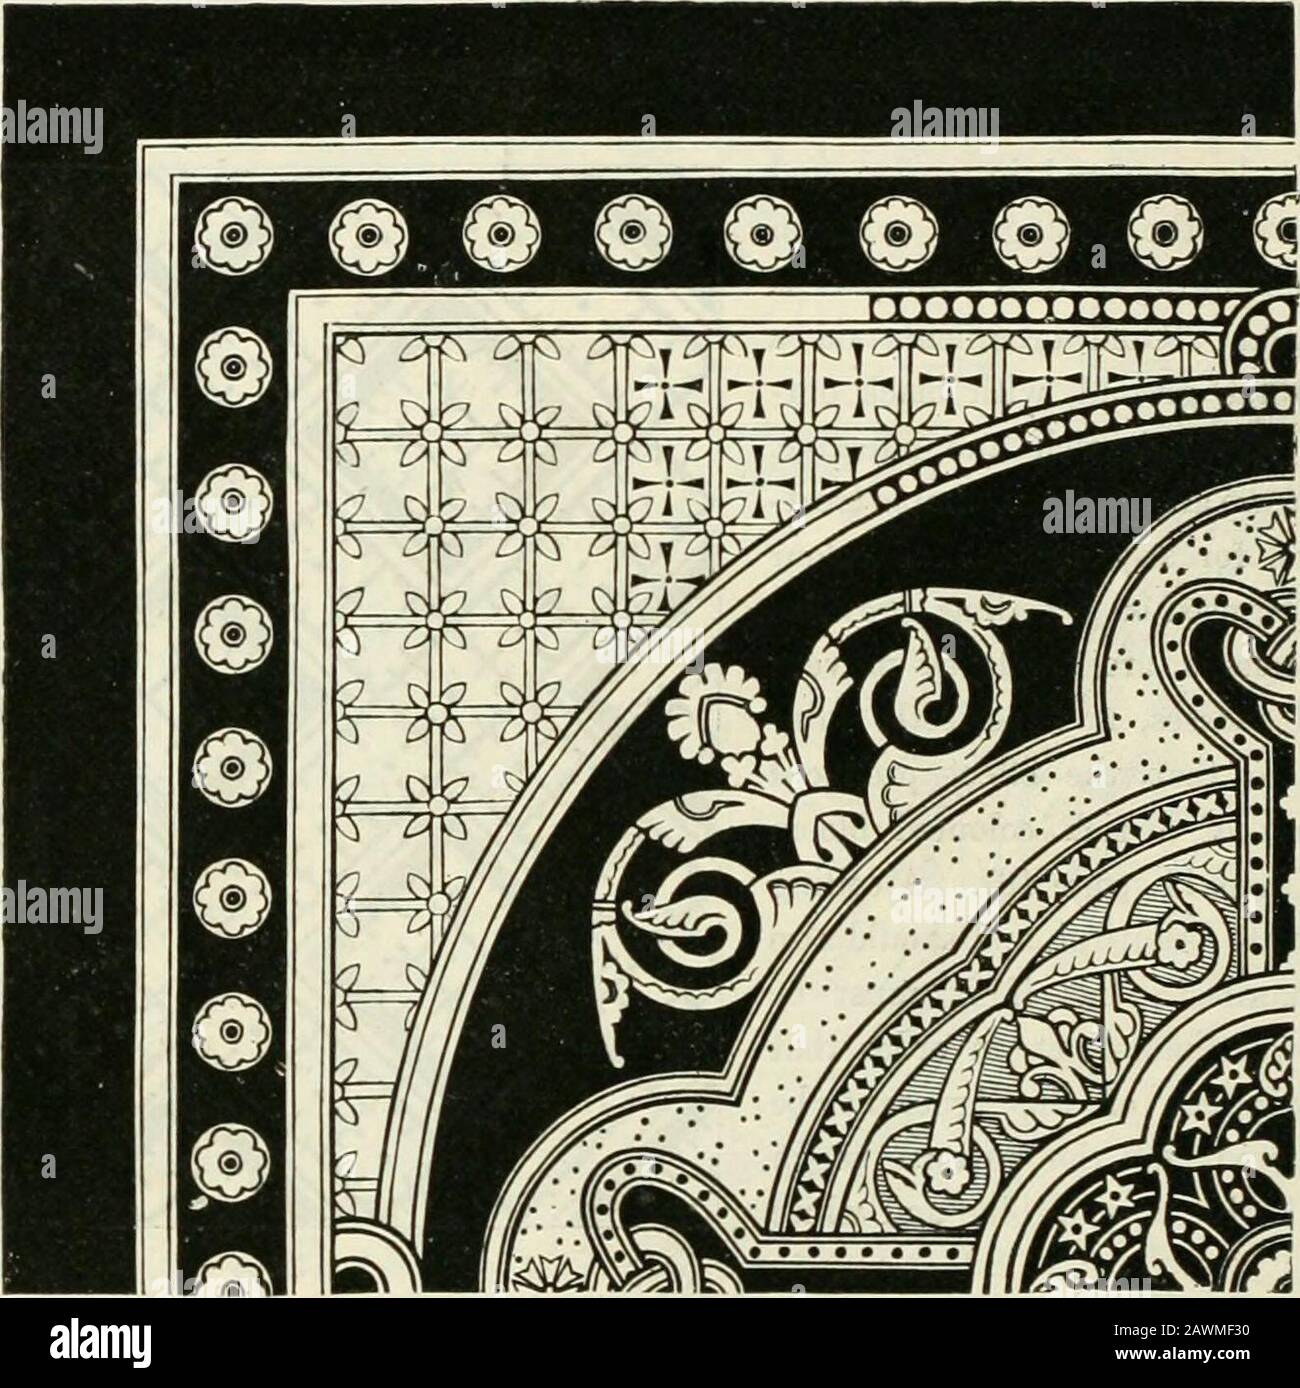 Principles of decorative design . Yig. 5-2. 78 ritlNCITLES OF DESIGN. must  not fictitiously represent relief, for no shadod ornament can be pleasant  -whenjilaced as the decoration of a flat architectural surface.